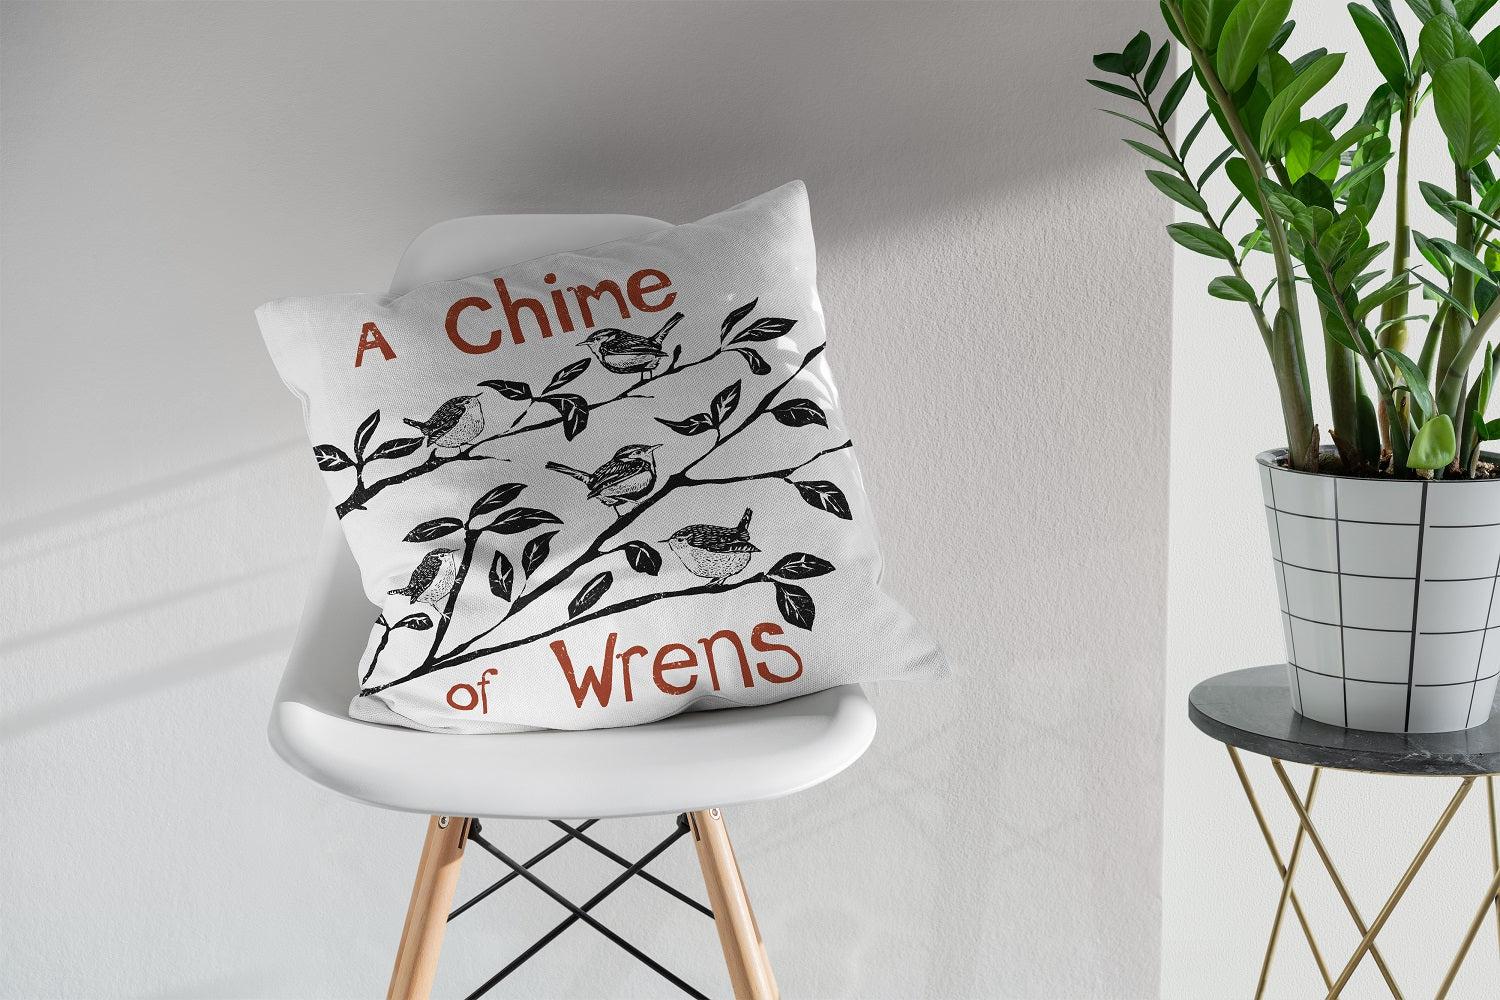 Chime of Wrens - Collective Noun Cushion